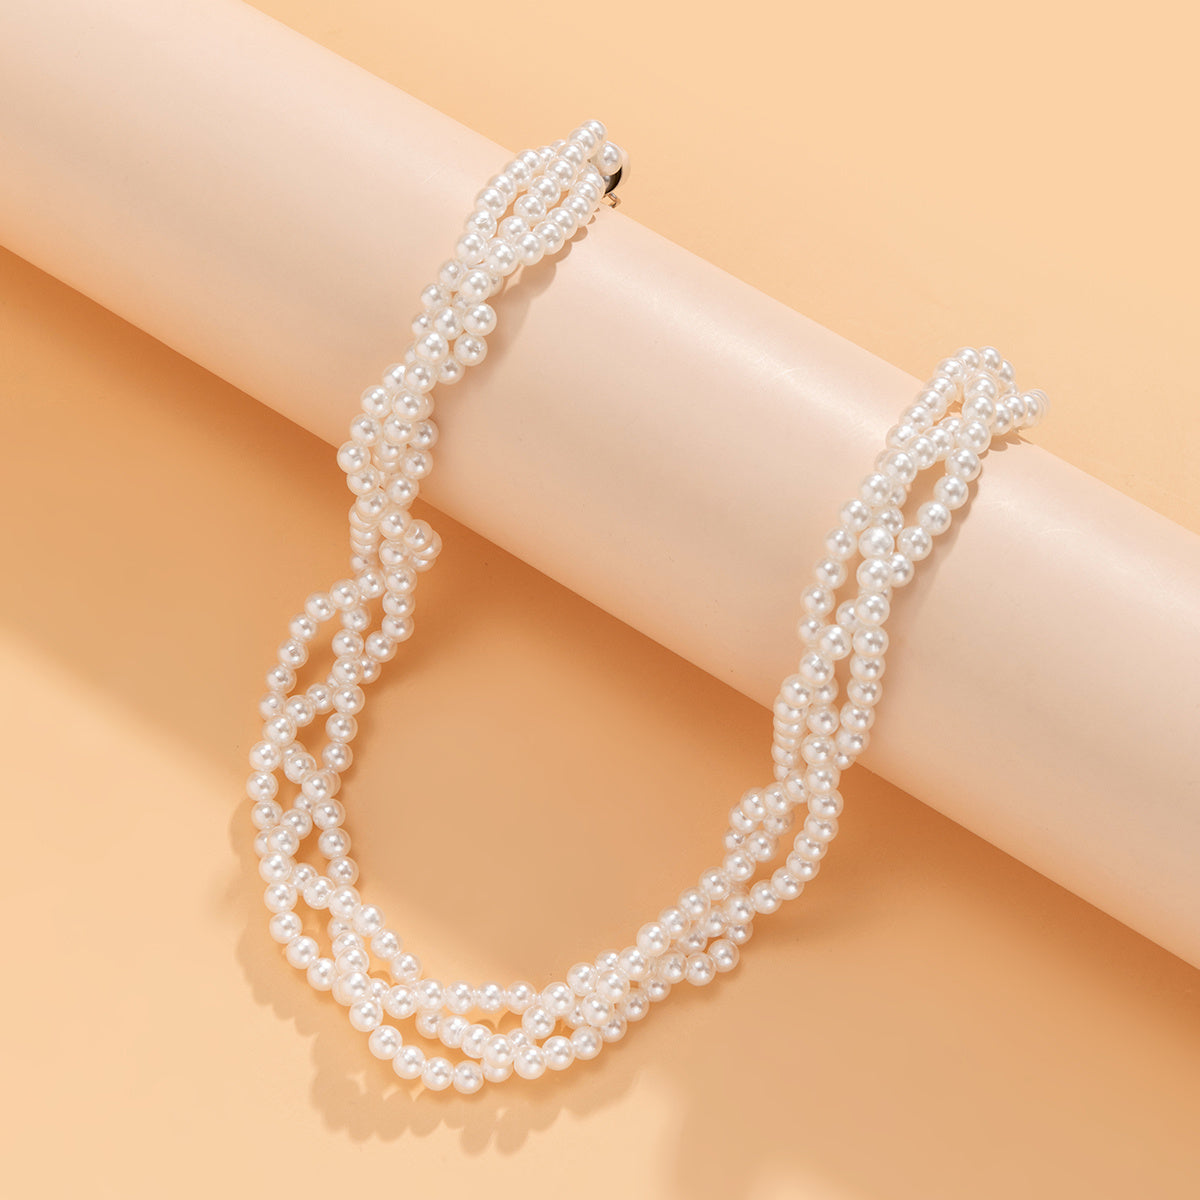 Gorgeous Ladies Fashion Hand-Braided Pearl Beaded Necklace